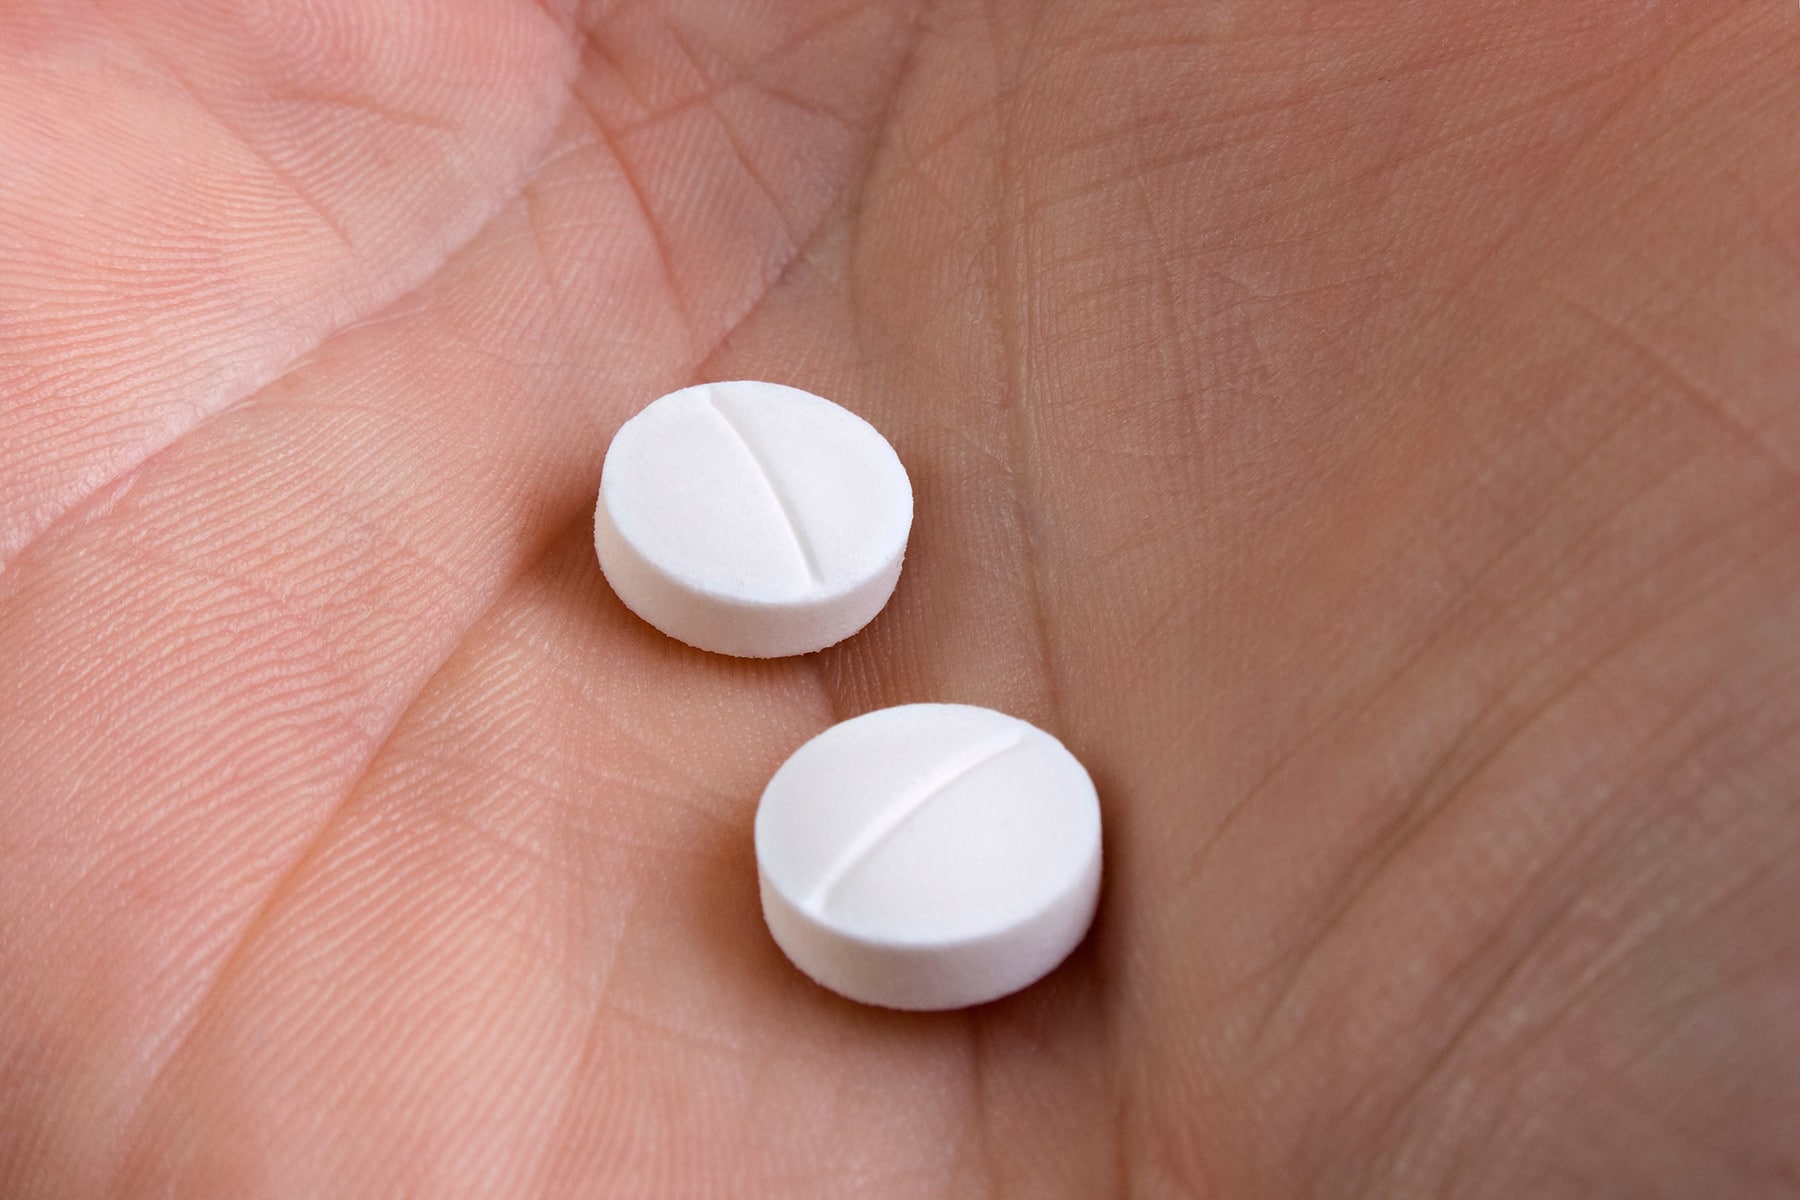 White Dwelling to Expend Restrictions on Abortion Pill Obtain entry to